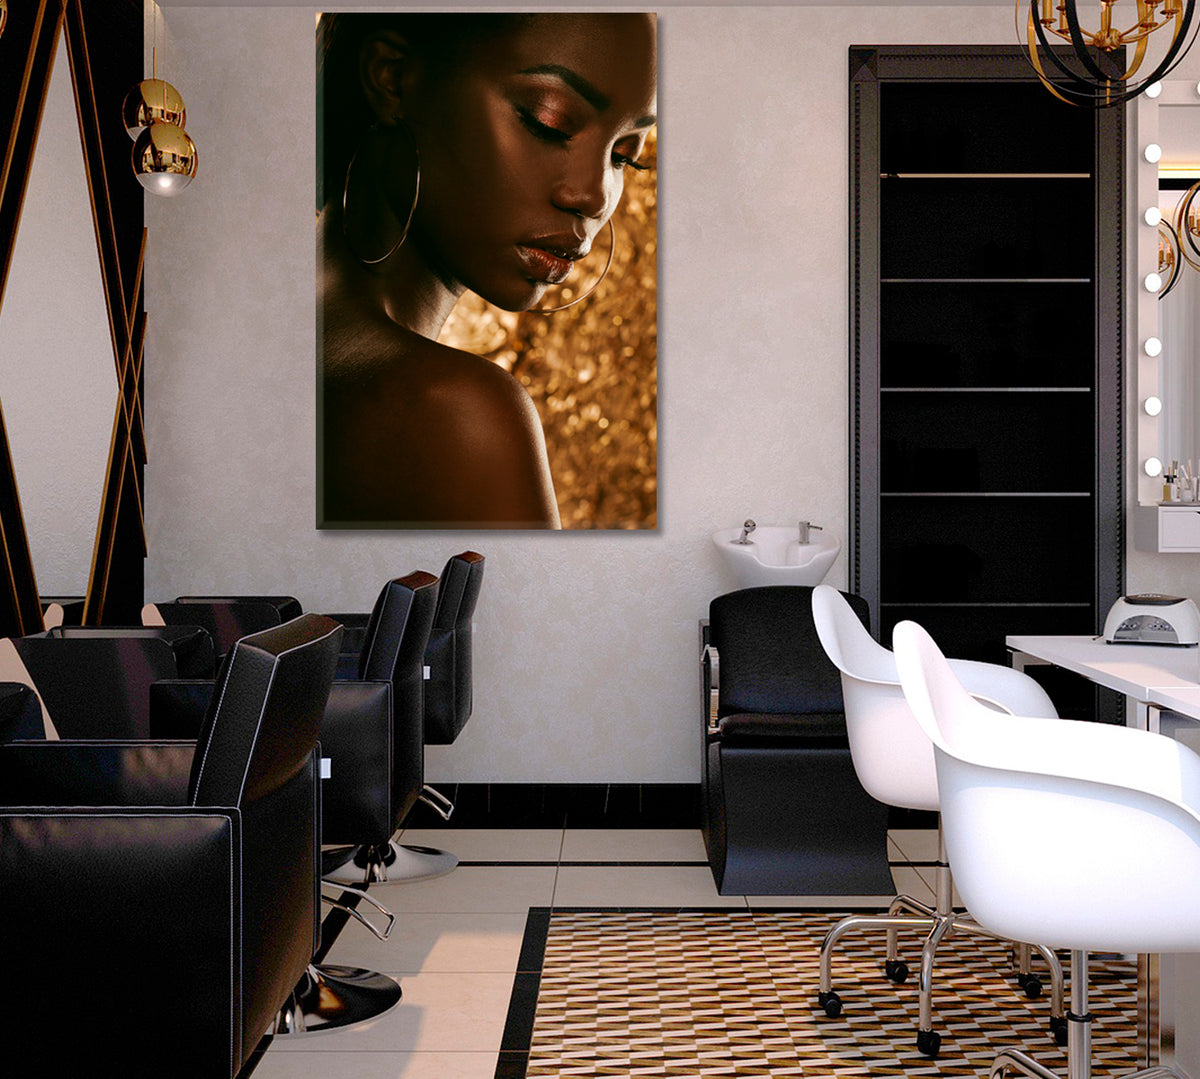 Stunning African American Woman Golden Background People Portrait Wall Hangings Artesty 1 Panel 16"x24" 